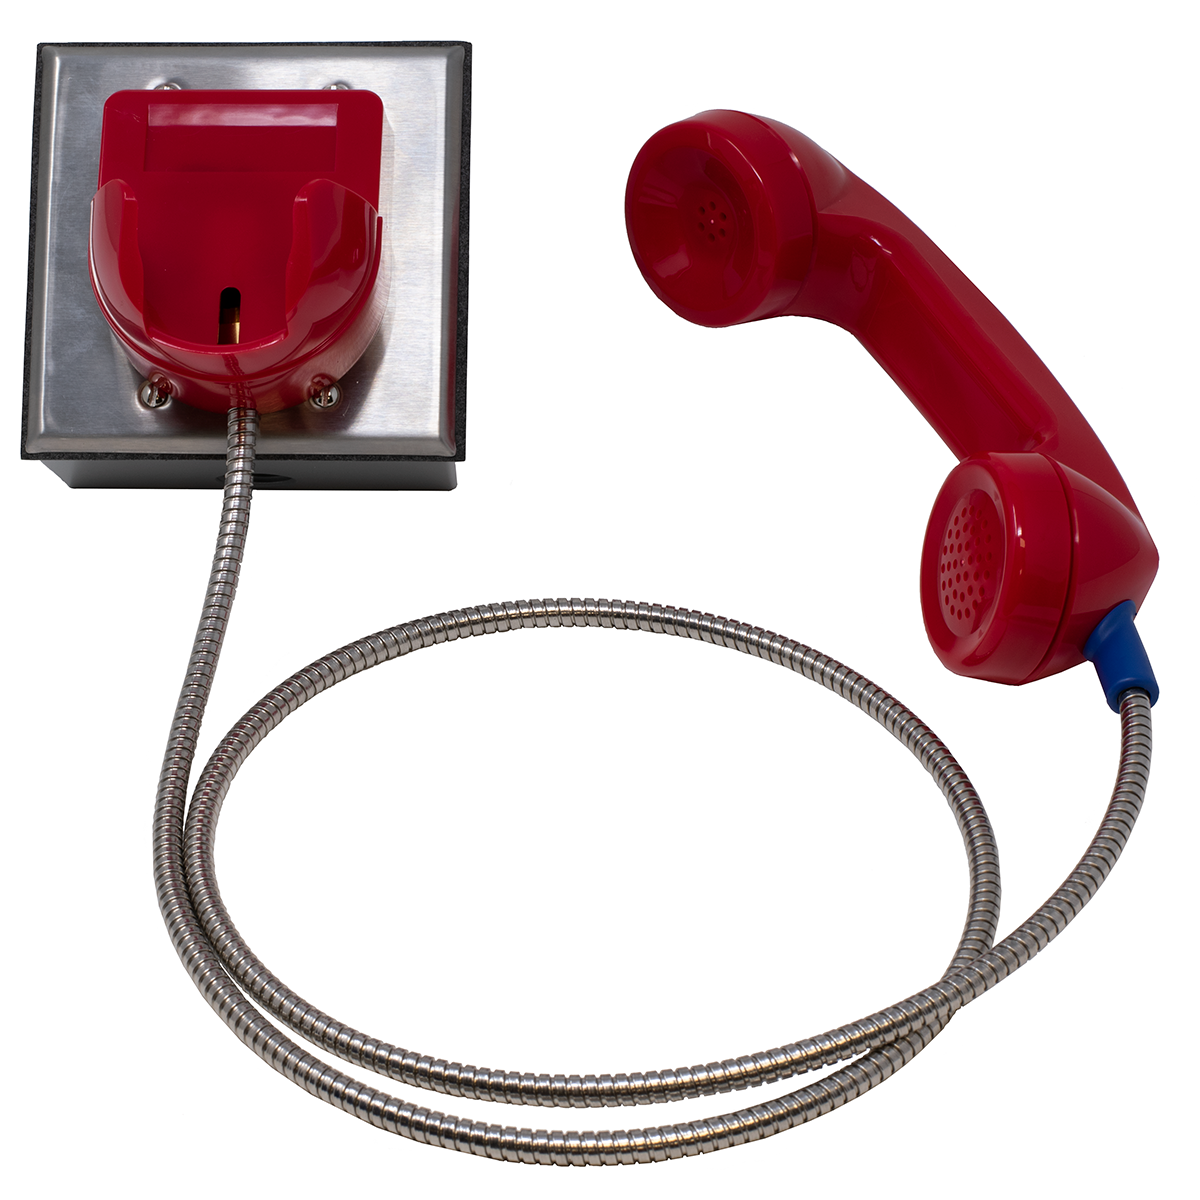 Outdoor Rated Telephone with Red Plastic Hookswitch (Front View)